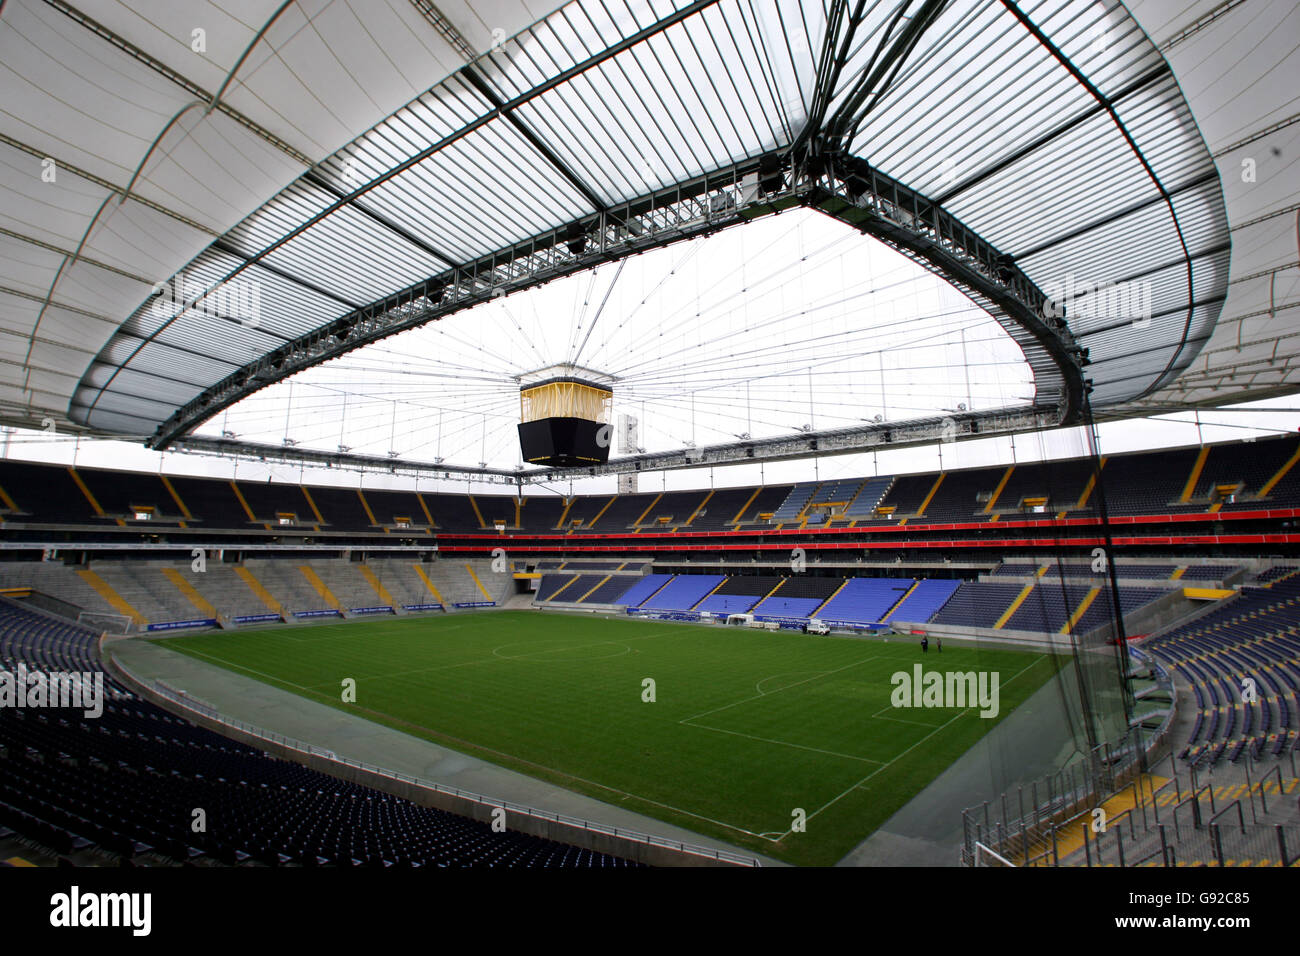 Soccer - FIFA World Cup 2006 Stadiums - Commerzbank-Arena - Frankfurt. General view of the Commerzbank-Arena Stock Photo